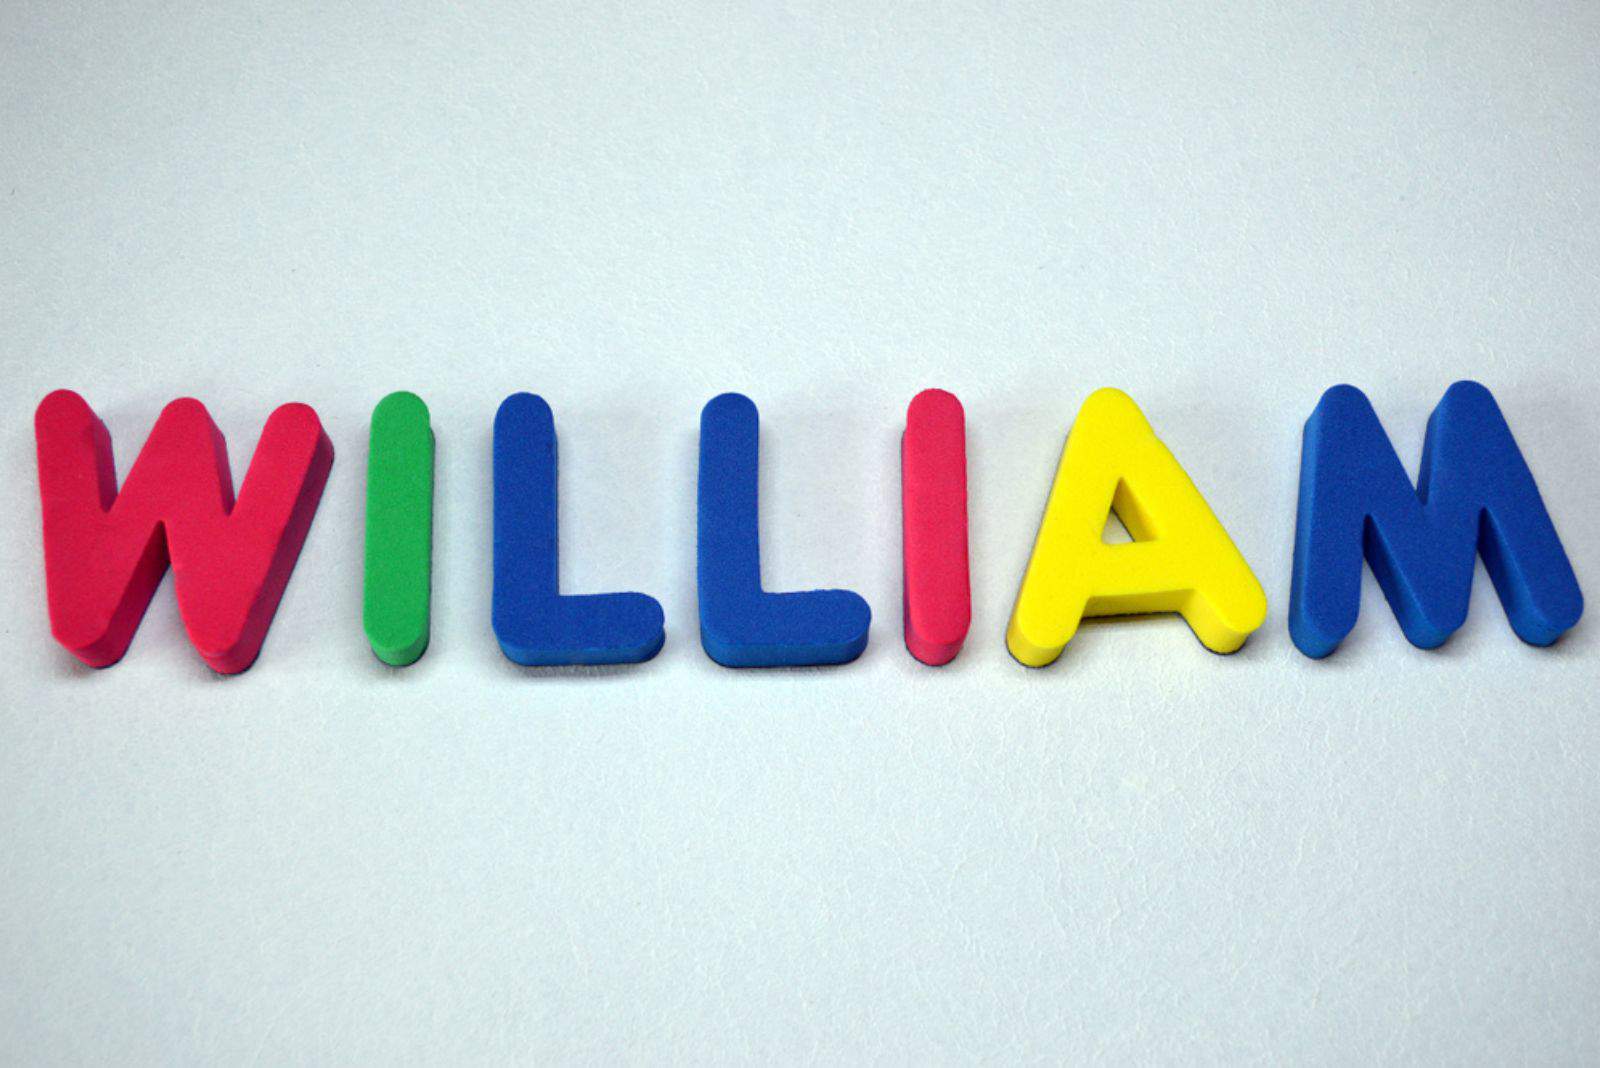 william name made from letters in color